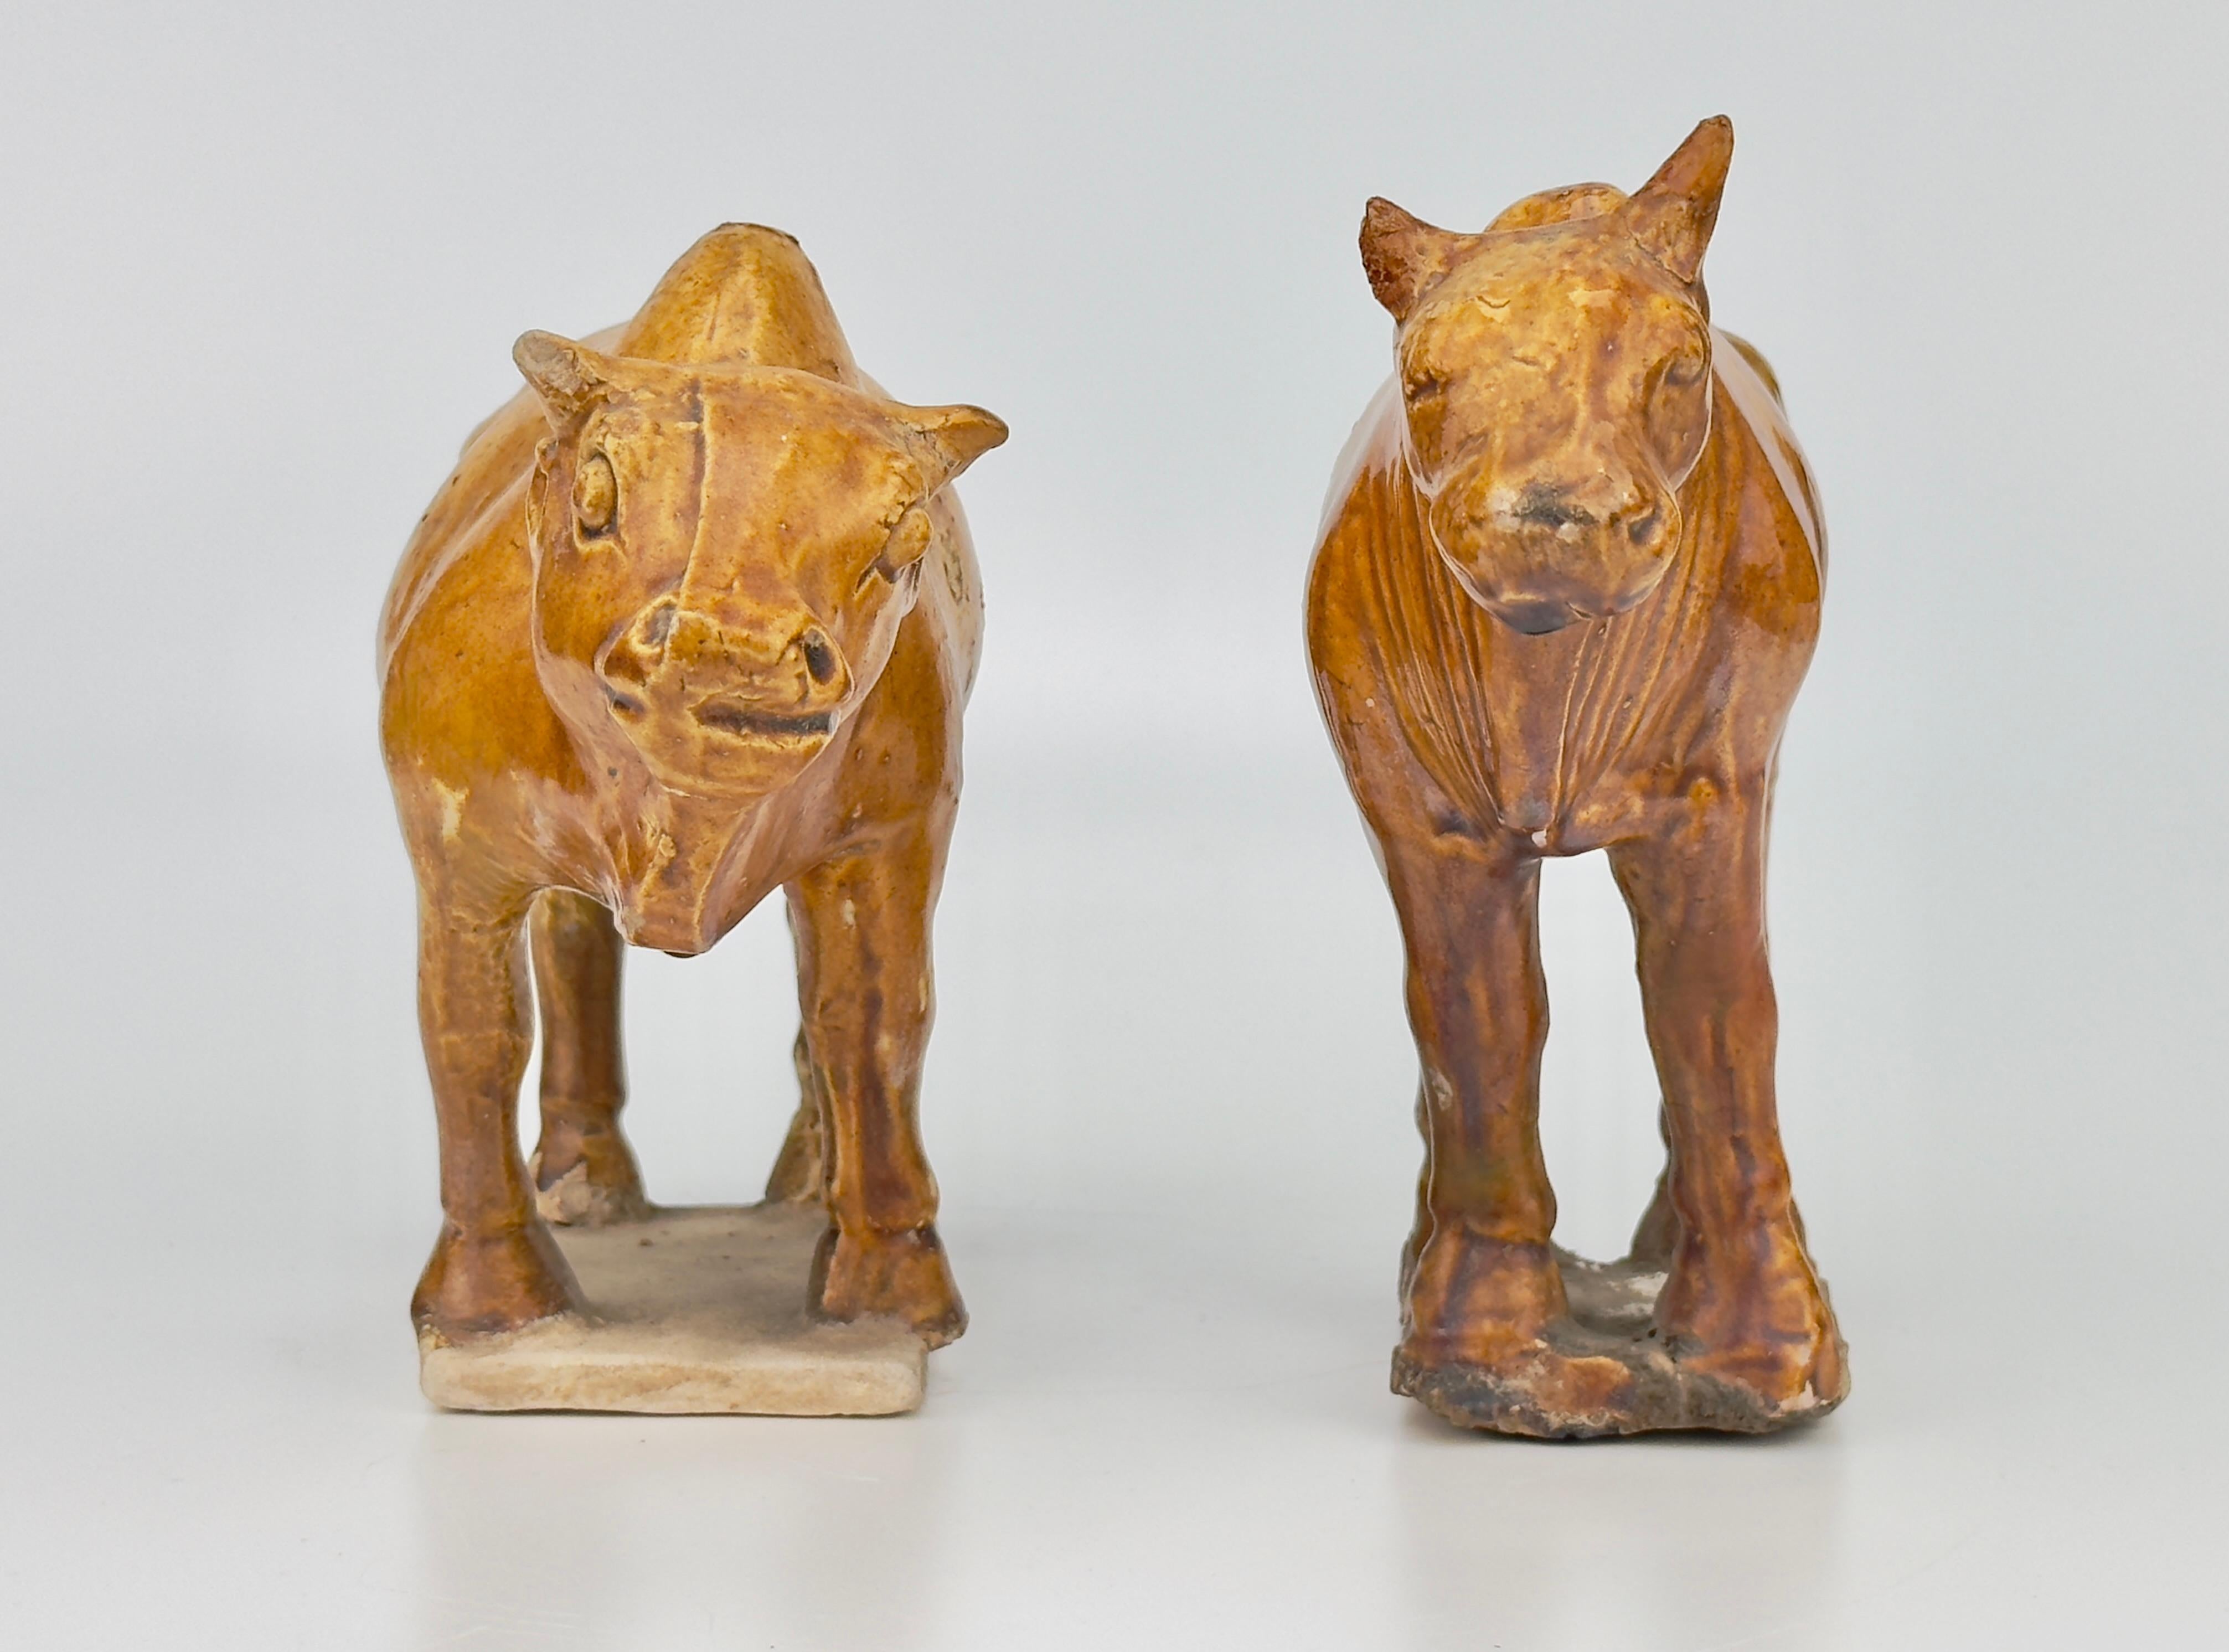 Naturalistically modelled, standing on a rectangular base with head facing forward and short tail curled to one side, incised details and covered overall in a rich chestnut glaze save for the hooves and base.

Date : Tang Dynasty(618-907)
Type :